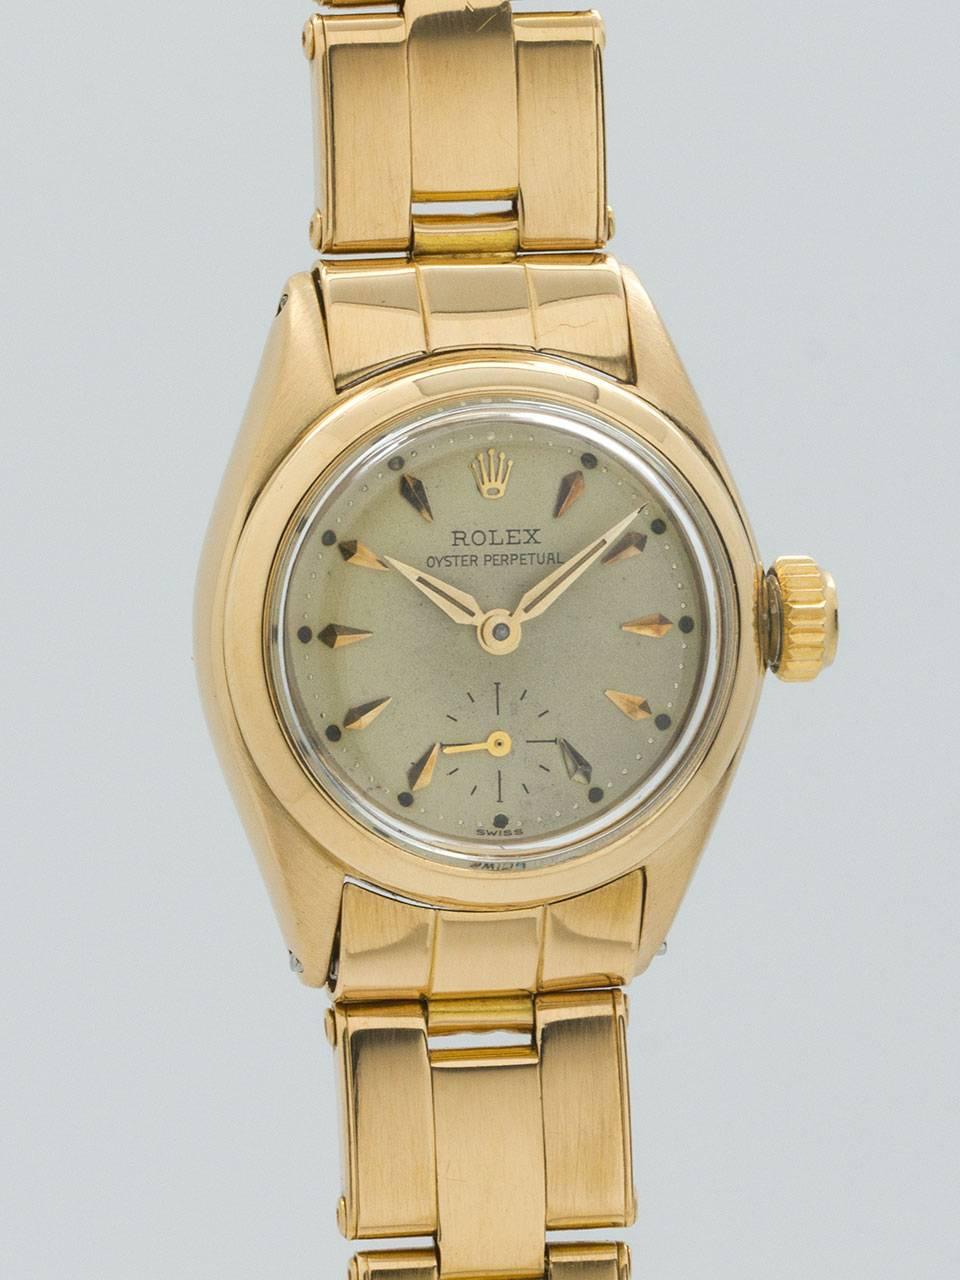 Lady's Rolex 18K Yellow Gold Oyster Perpetual Wristwatch ref 6502 serial #100,xxx circa 1955. Small size, 25 mm diameter Oyster case with screw down case back and screw down period crown. Smooth bezel and acrylic crystal. Original warmly patina’d